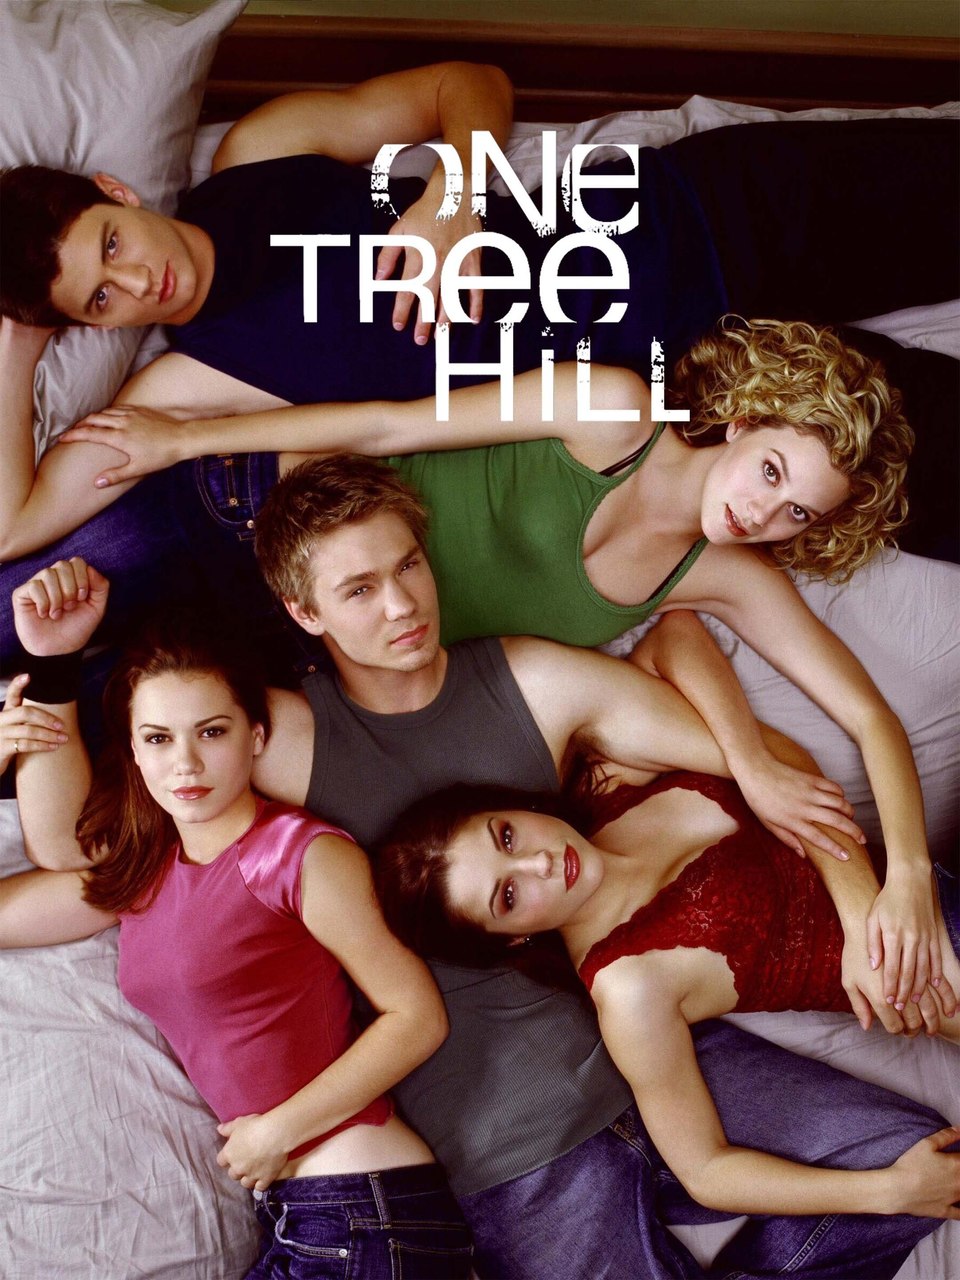 Series One Tree Hill